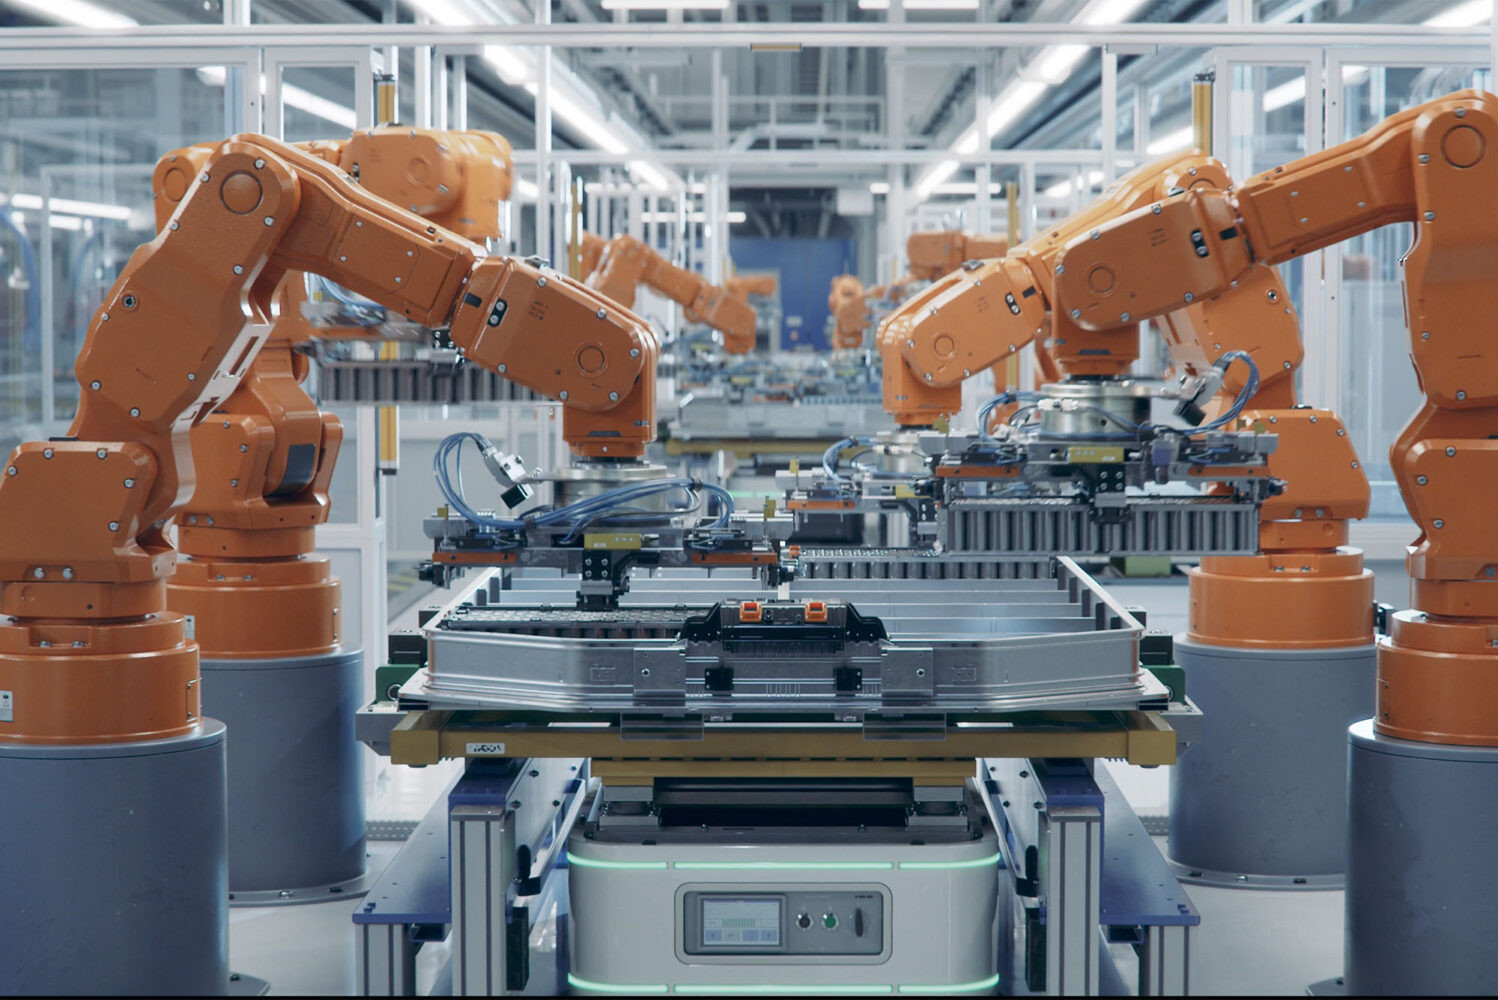 Photo: A set of 4 large orange robotic arms assembling a large electric car battery on a production line